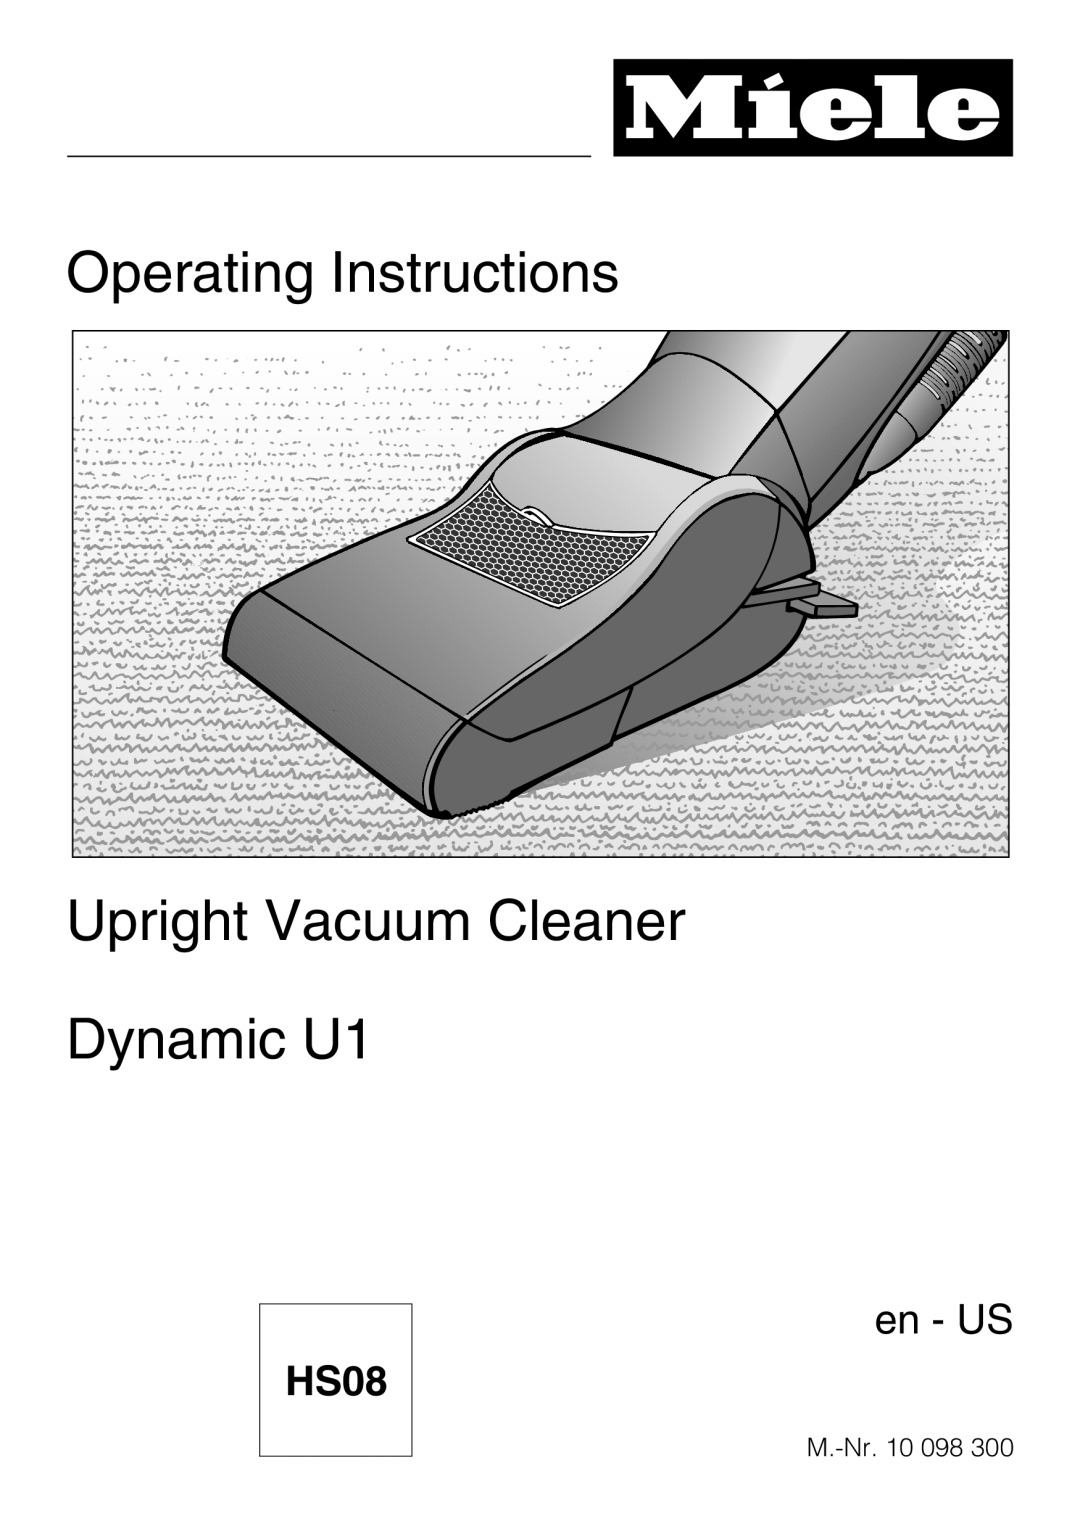 Miele M-NR09753 090 operating instructions Operating Instructions Upright Vacuum cleaner S, HS08, en - US 